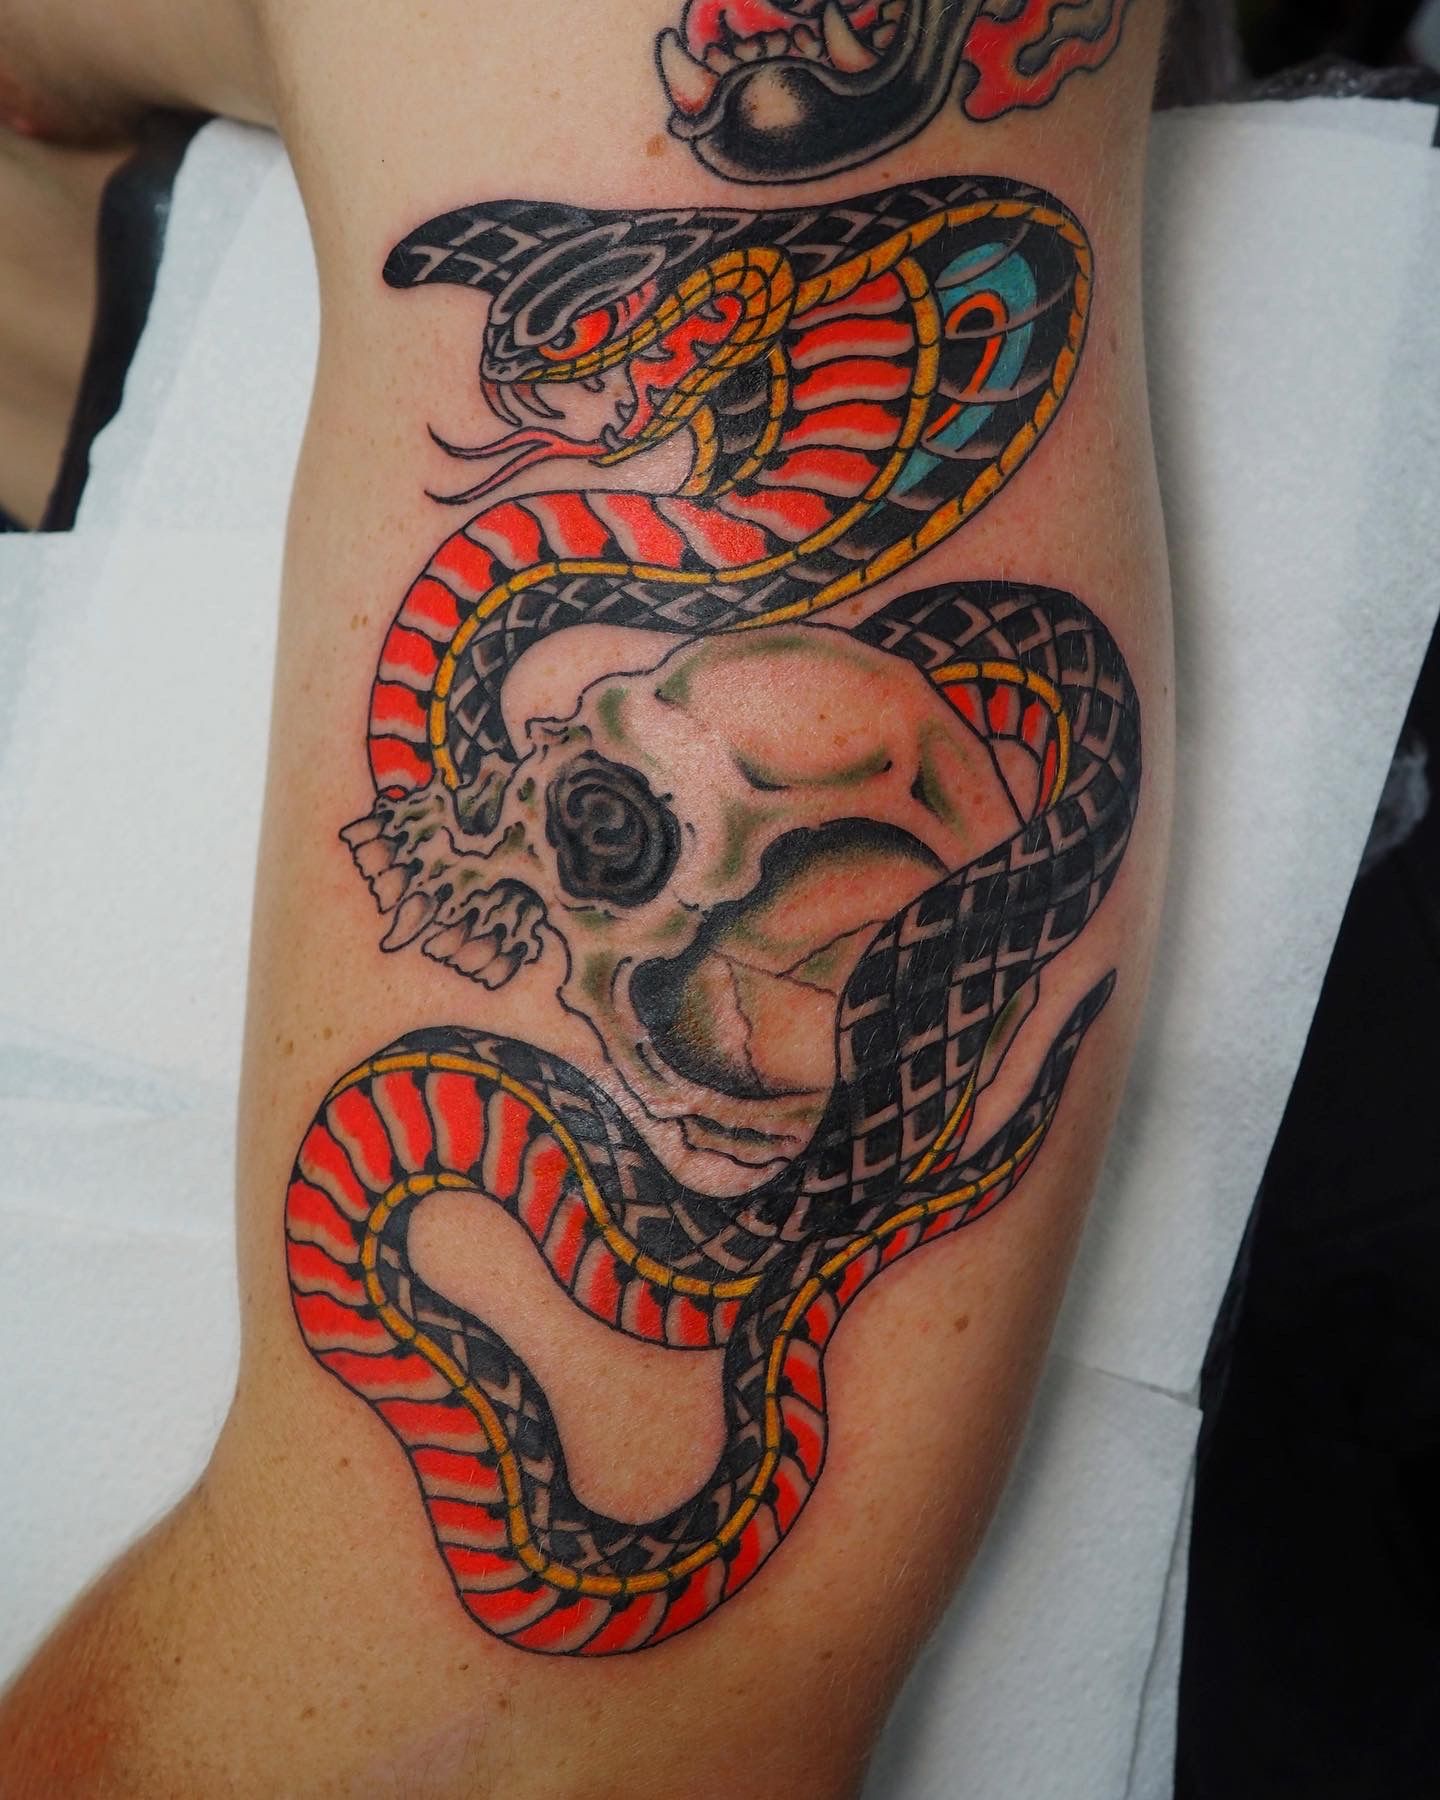 LONE STAR TATTOO-Dallas,Texas - Traditional cobra and skull by @waylon.tx -  Waylon has tons of sweet traditional pre-drawn designs available up here at  the shop and they're goin fast so swing by